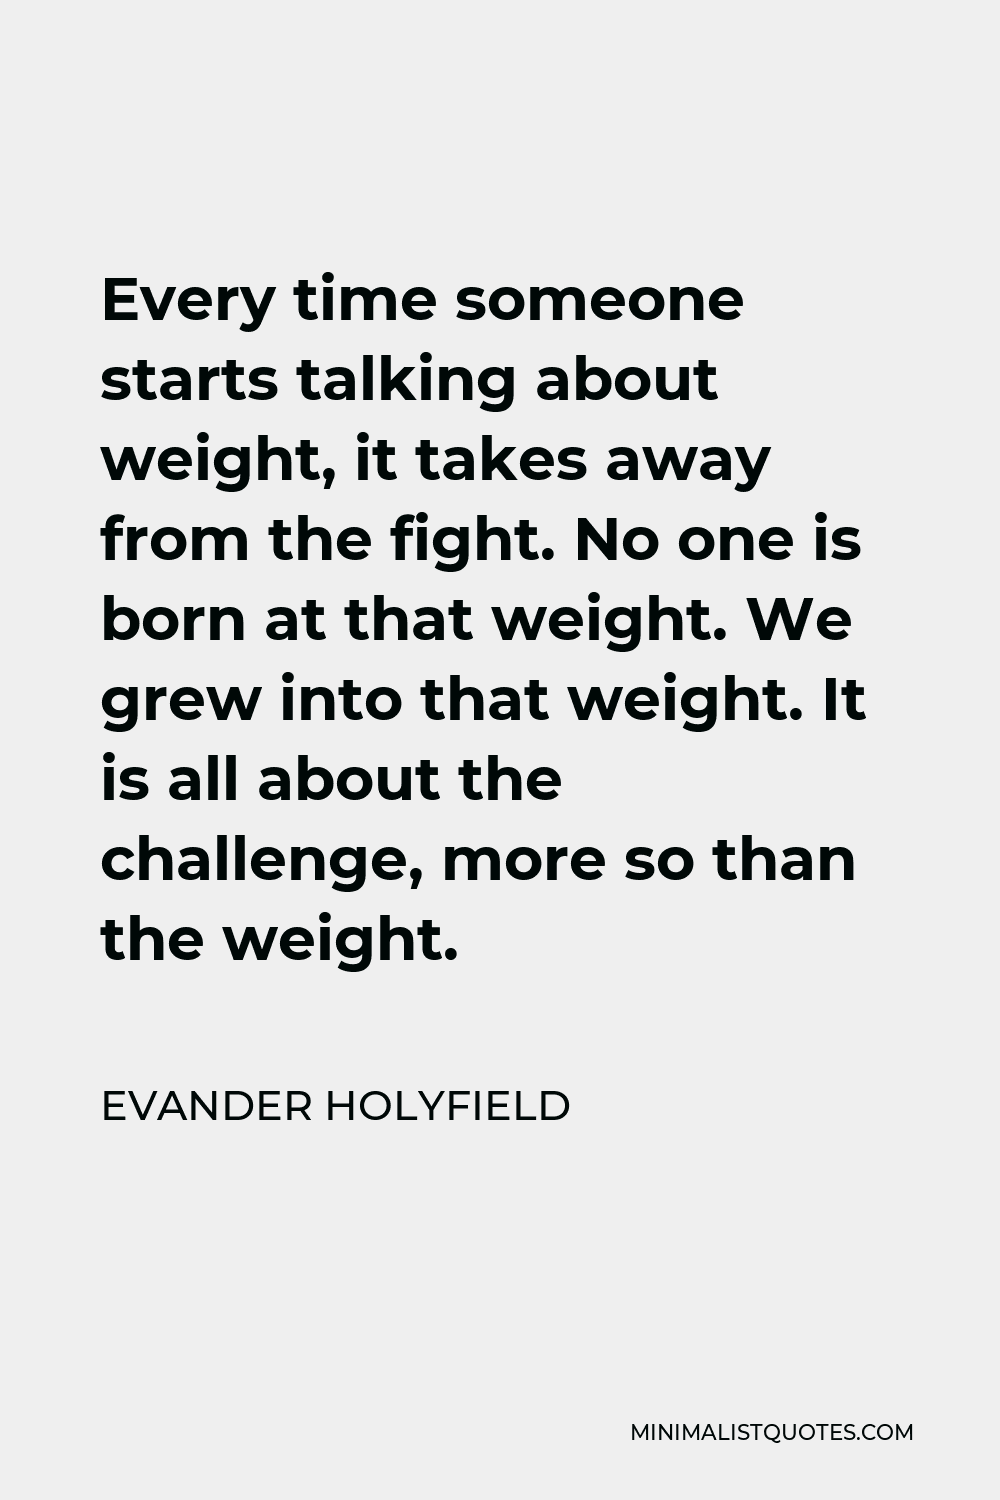 Evander Holyfield Quote - Every time someone starts talking about weight, it takes away from the fight. No one is born at that weight. We grew into that weight. It is all about the challenge, more so than the weight.